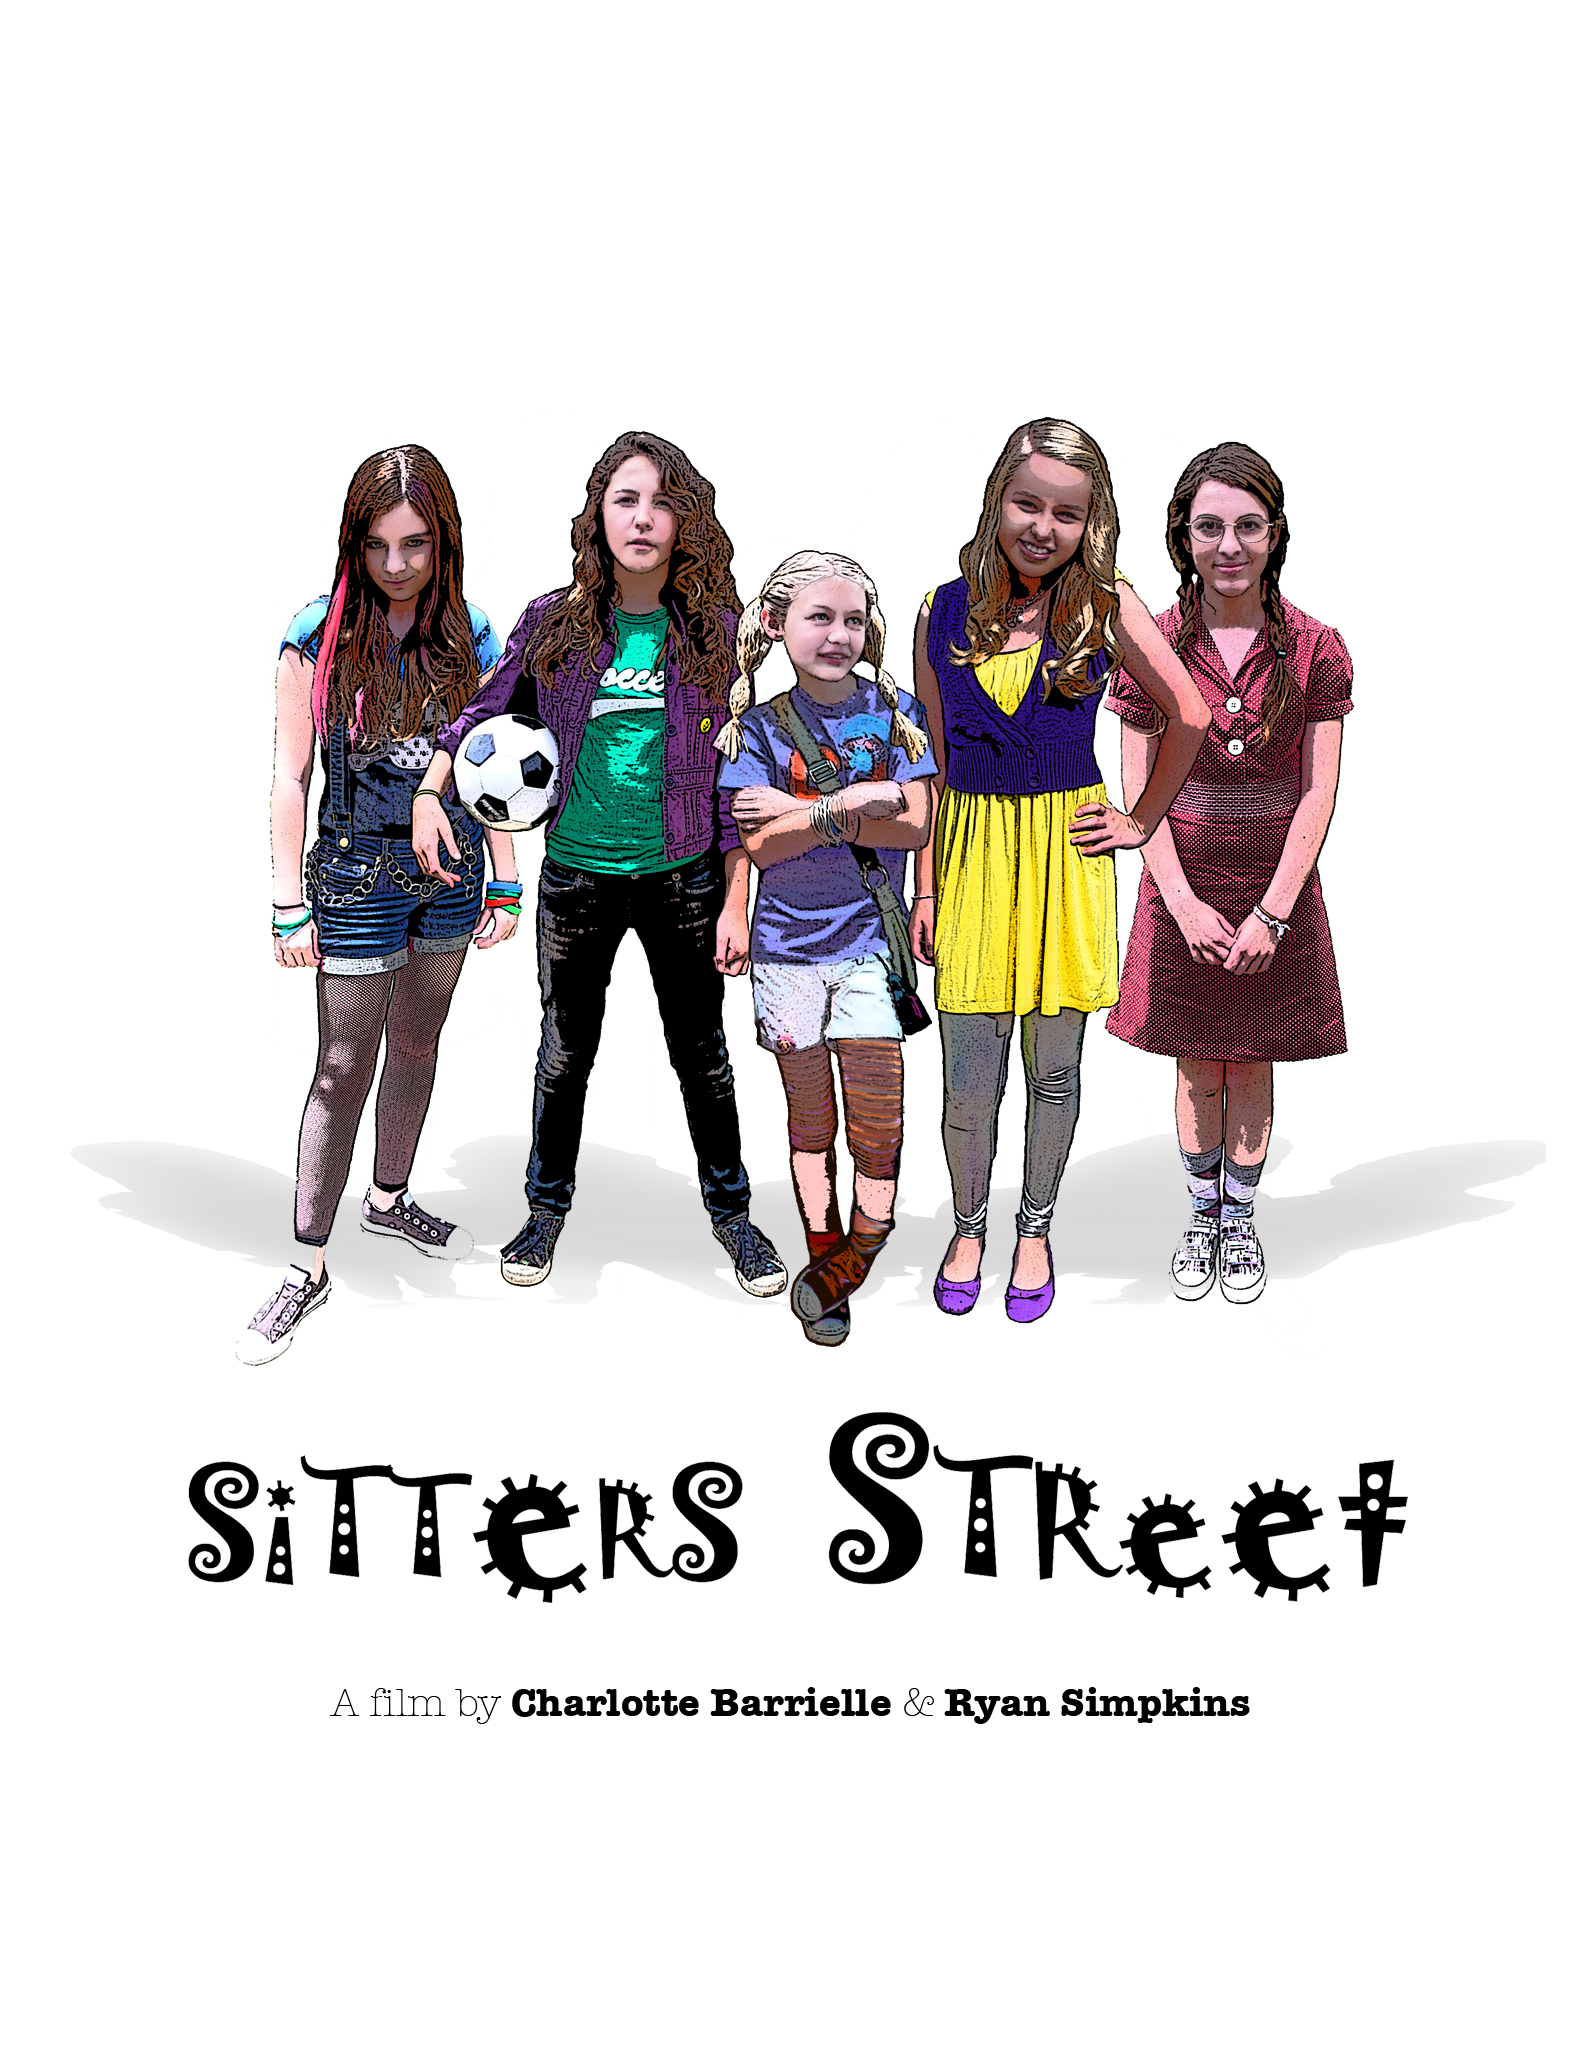 Sitters Street Poster 2010